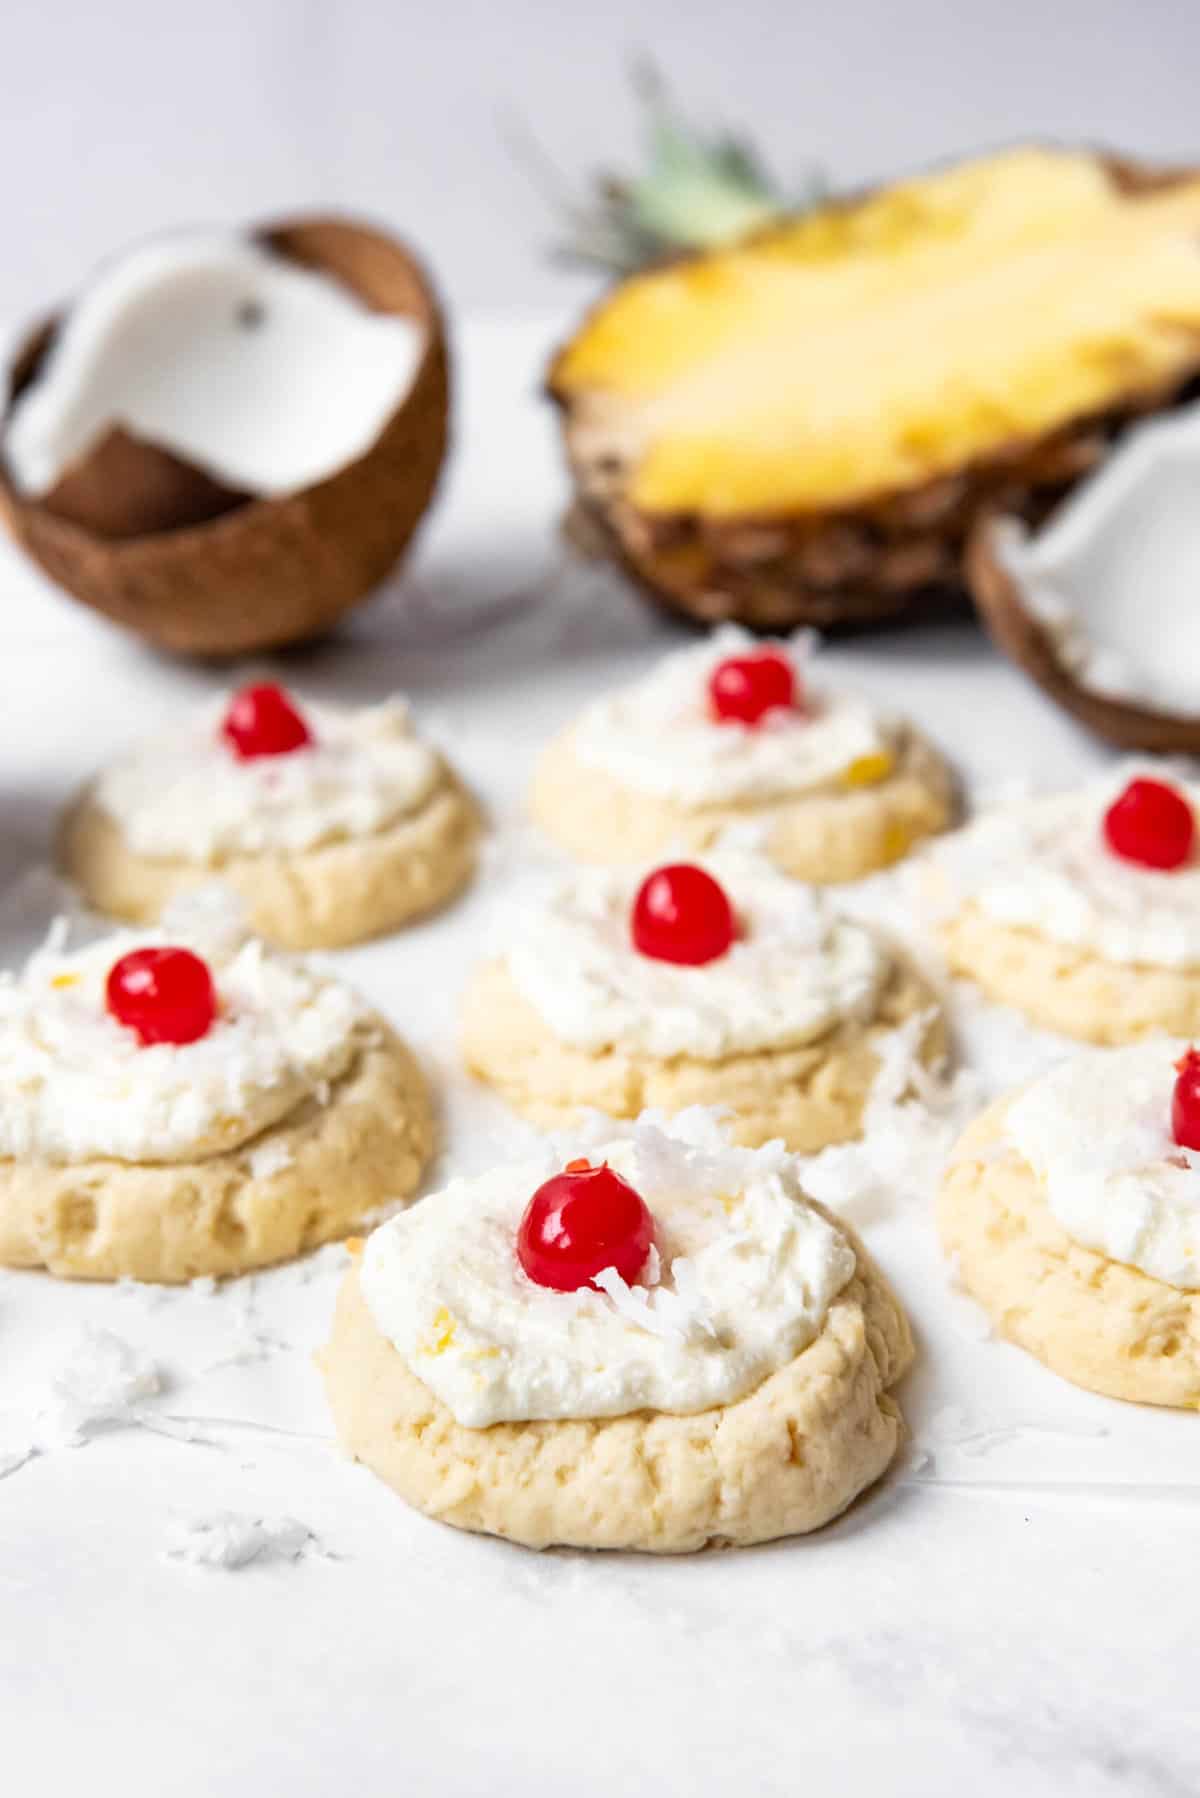 Soft pina colada cookies with frosting and maraschino cherries on top in front of a pineapple and coconut.